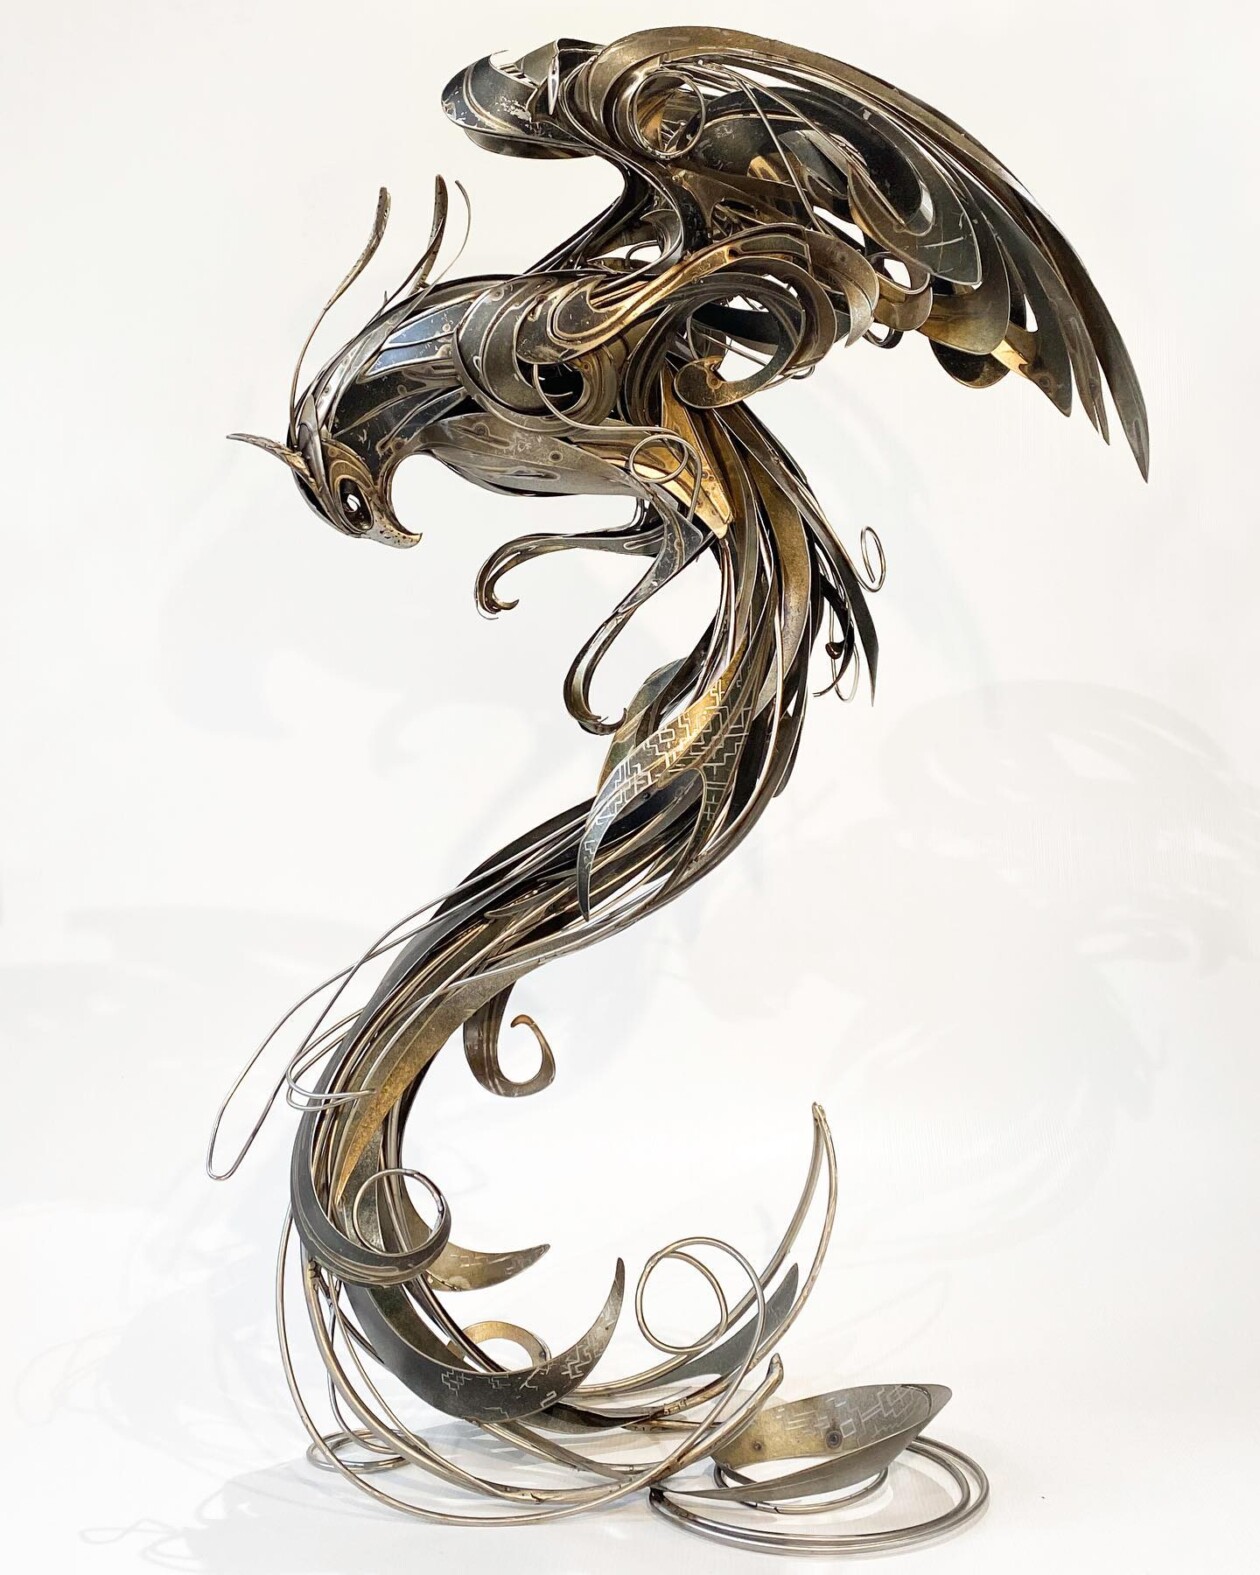 Magnificent Metallic Animal Sculptures Made With Sweeping Lines By Georgie Seccull (4)